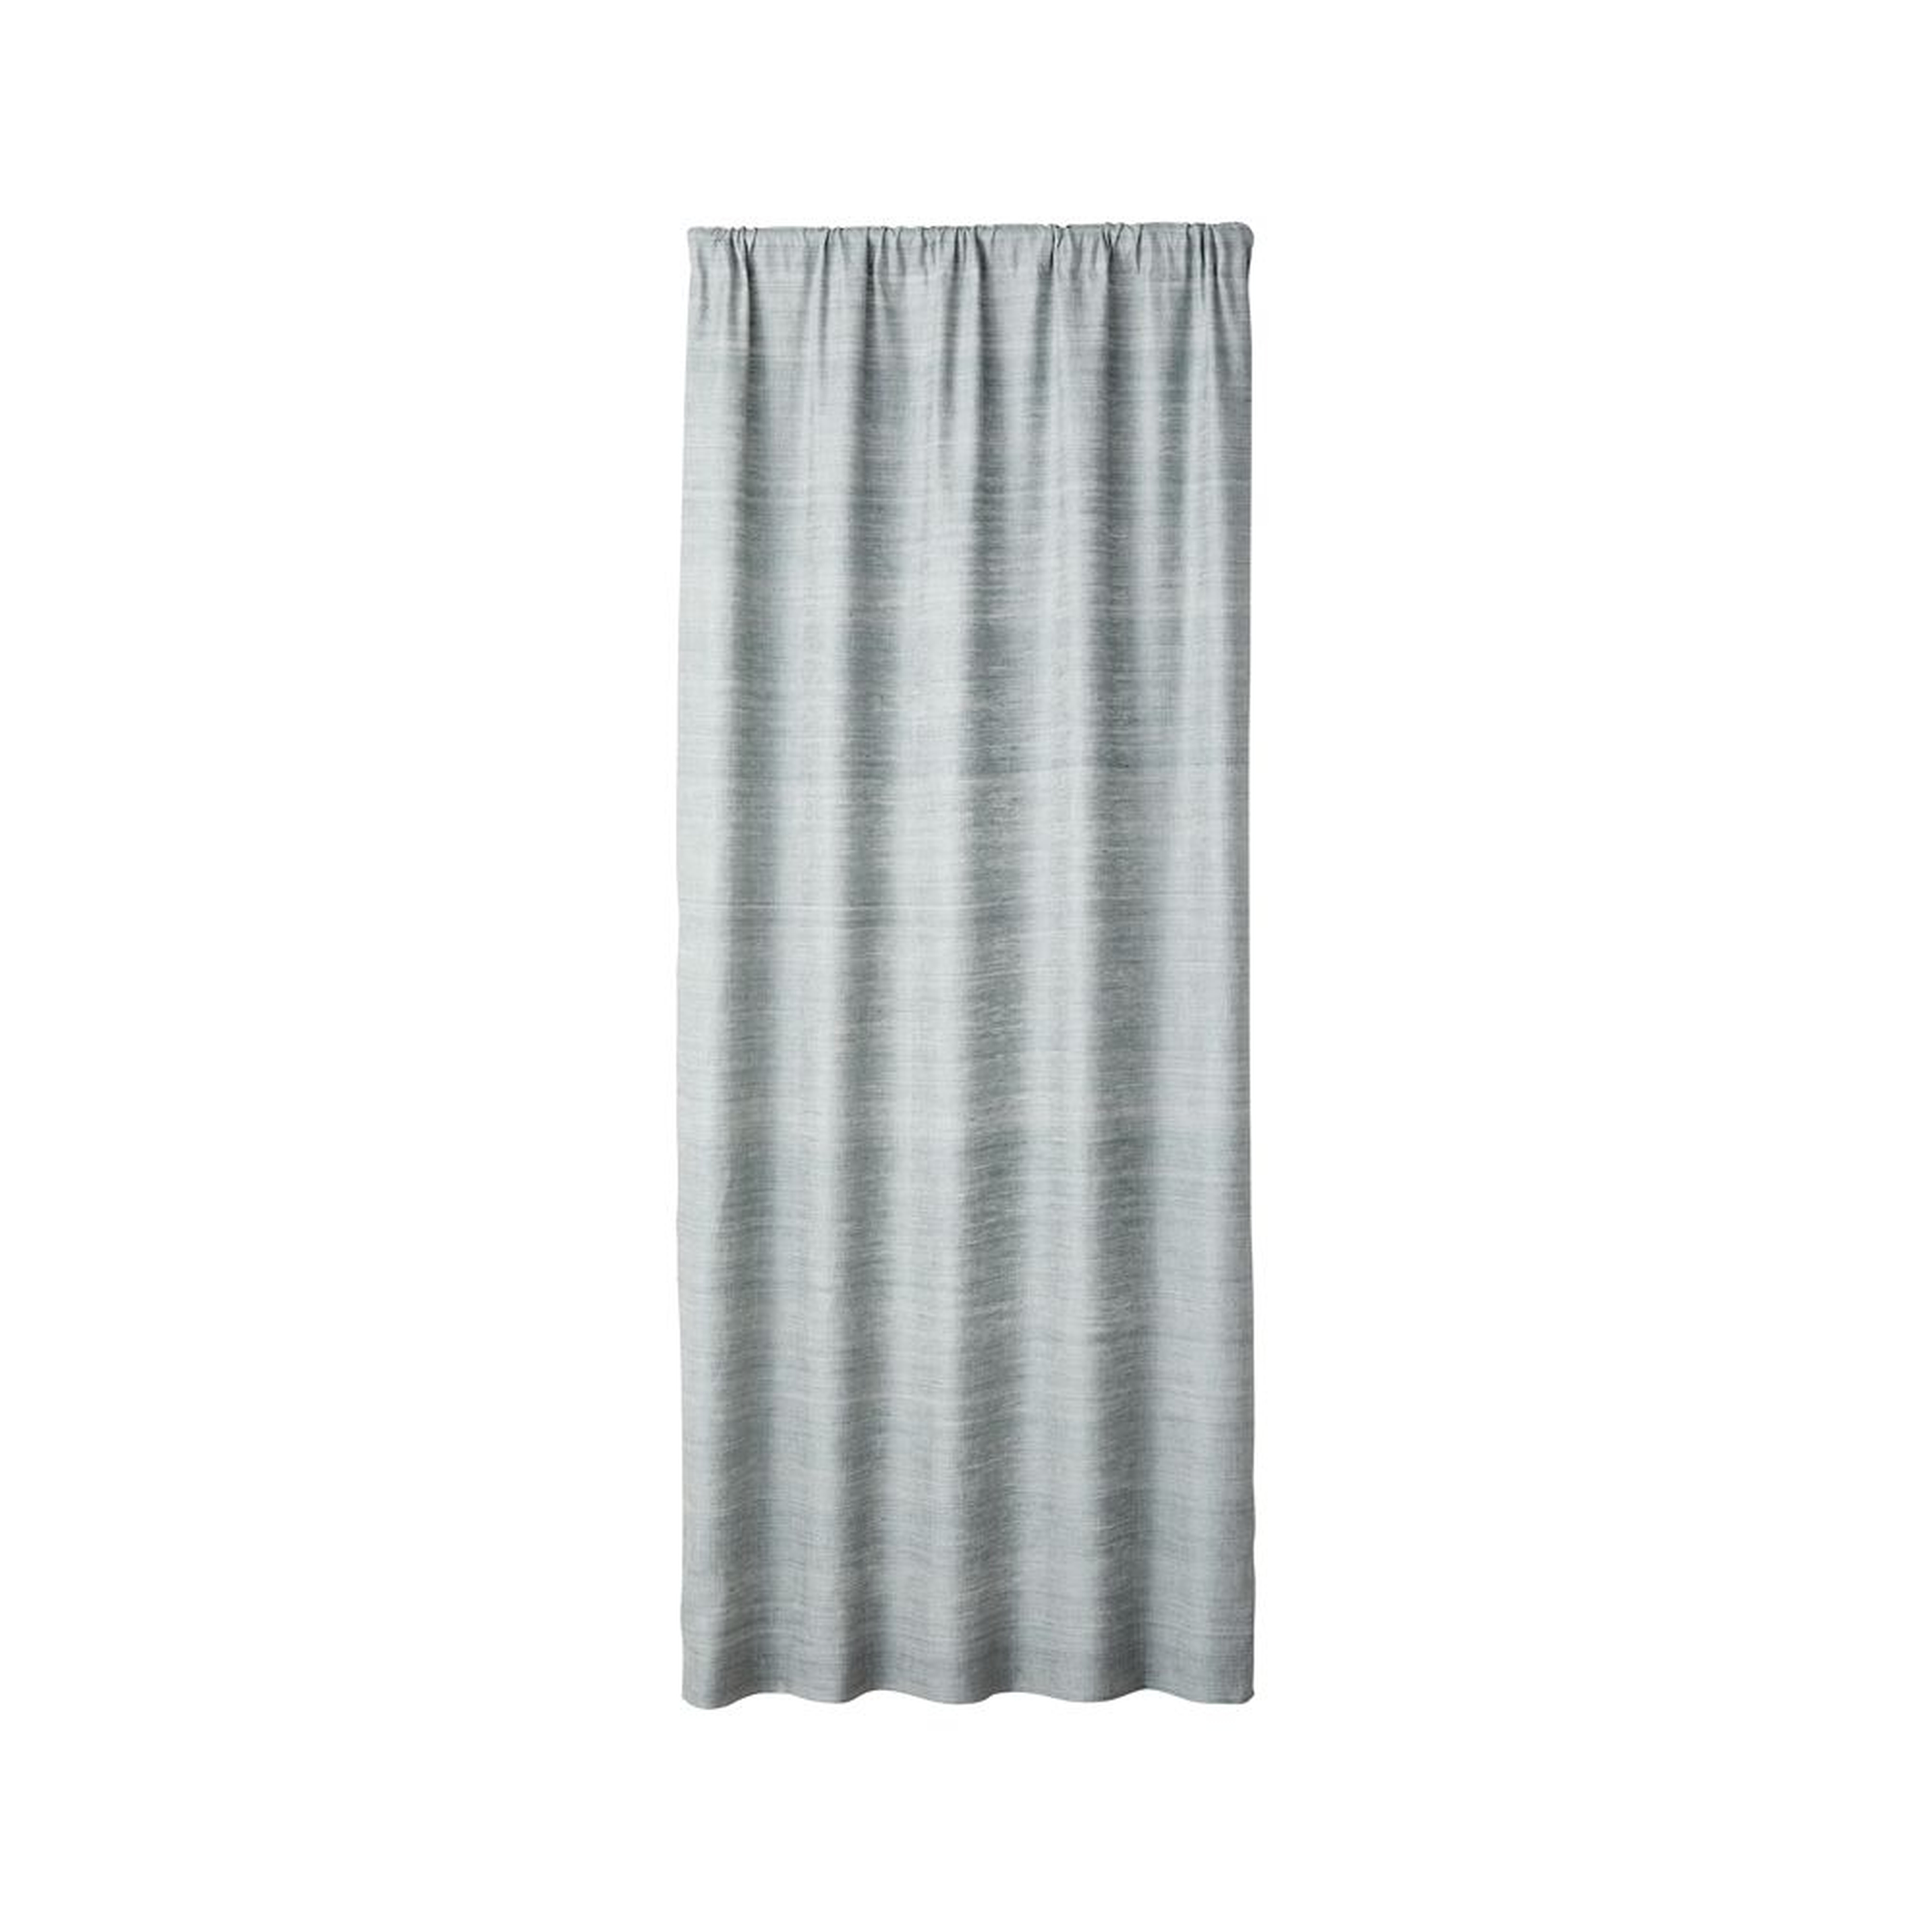 Silvana Silk Abyss Curtain Panel 48"x108" - Crate and Barrel